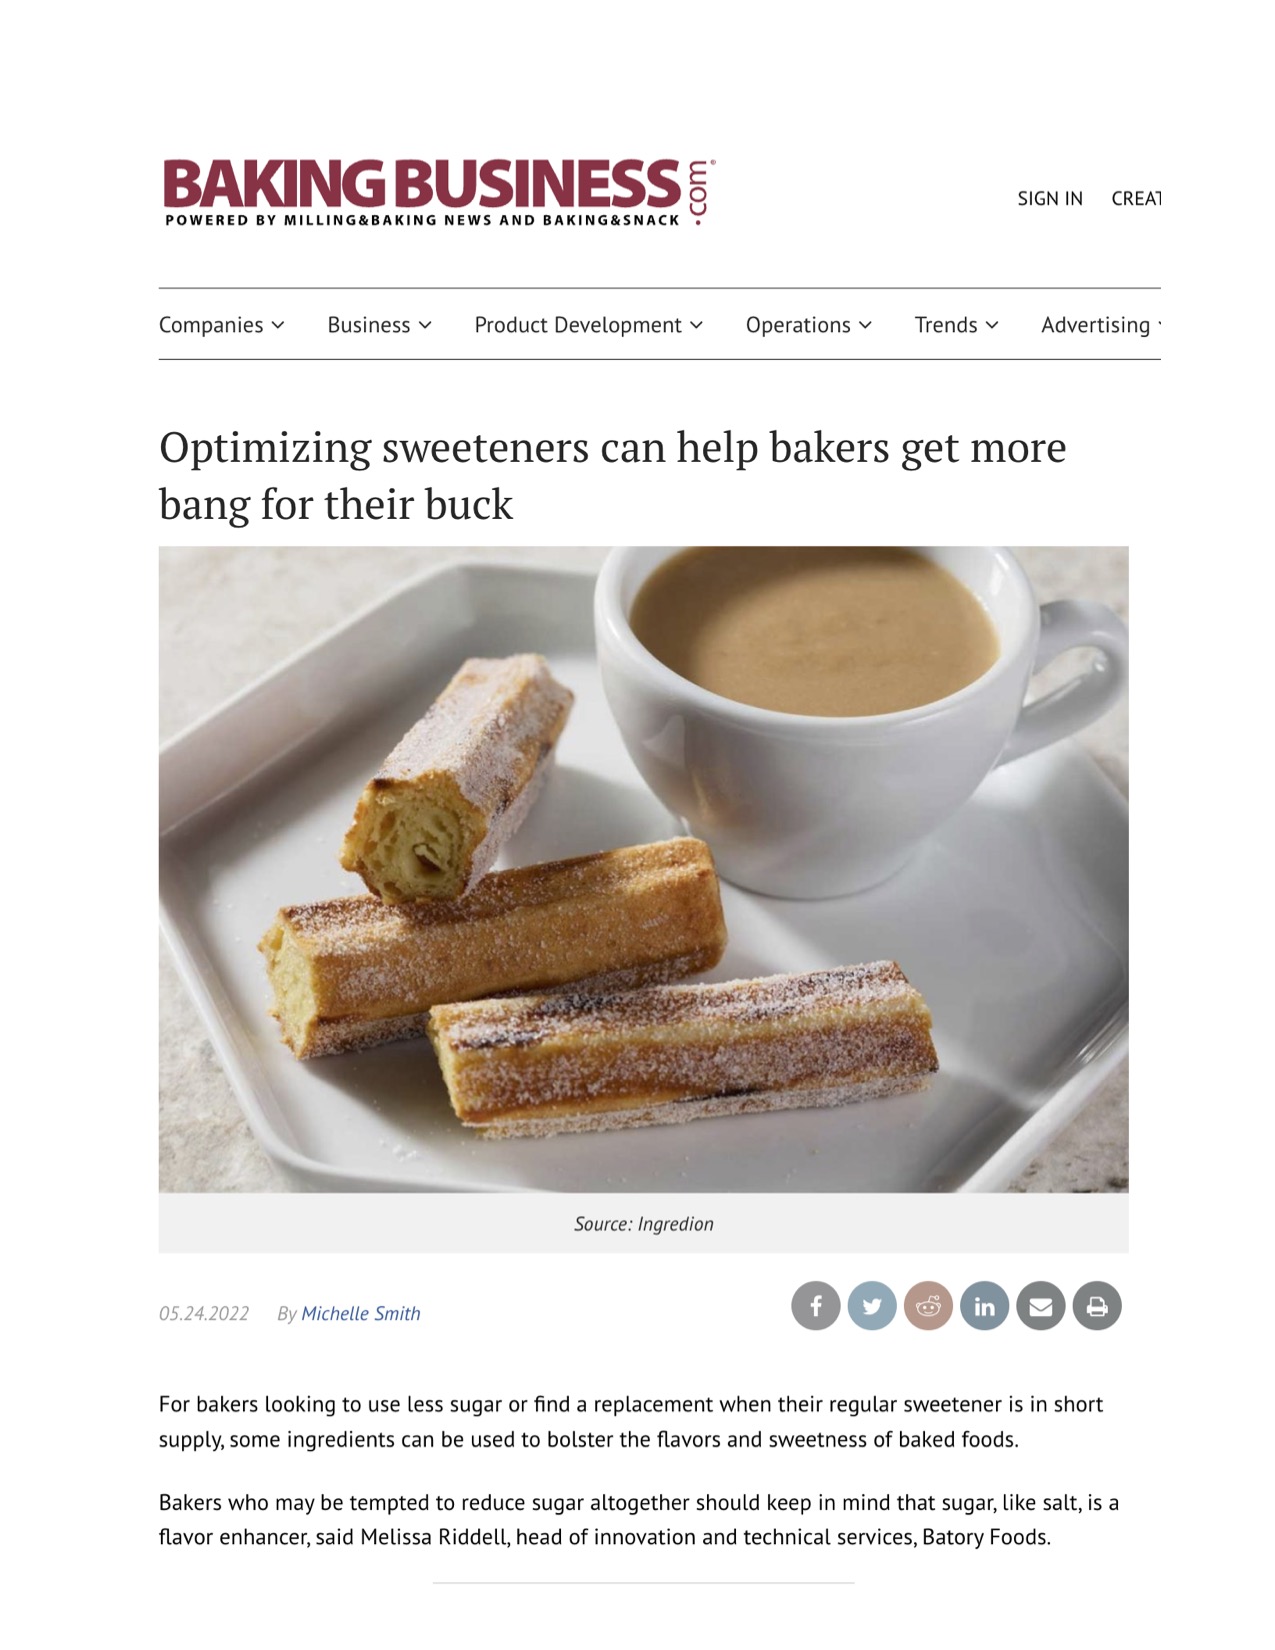 Optimizing Sweeteners Can Help Bakers Get More Bang for Their Buck